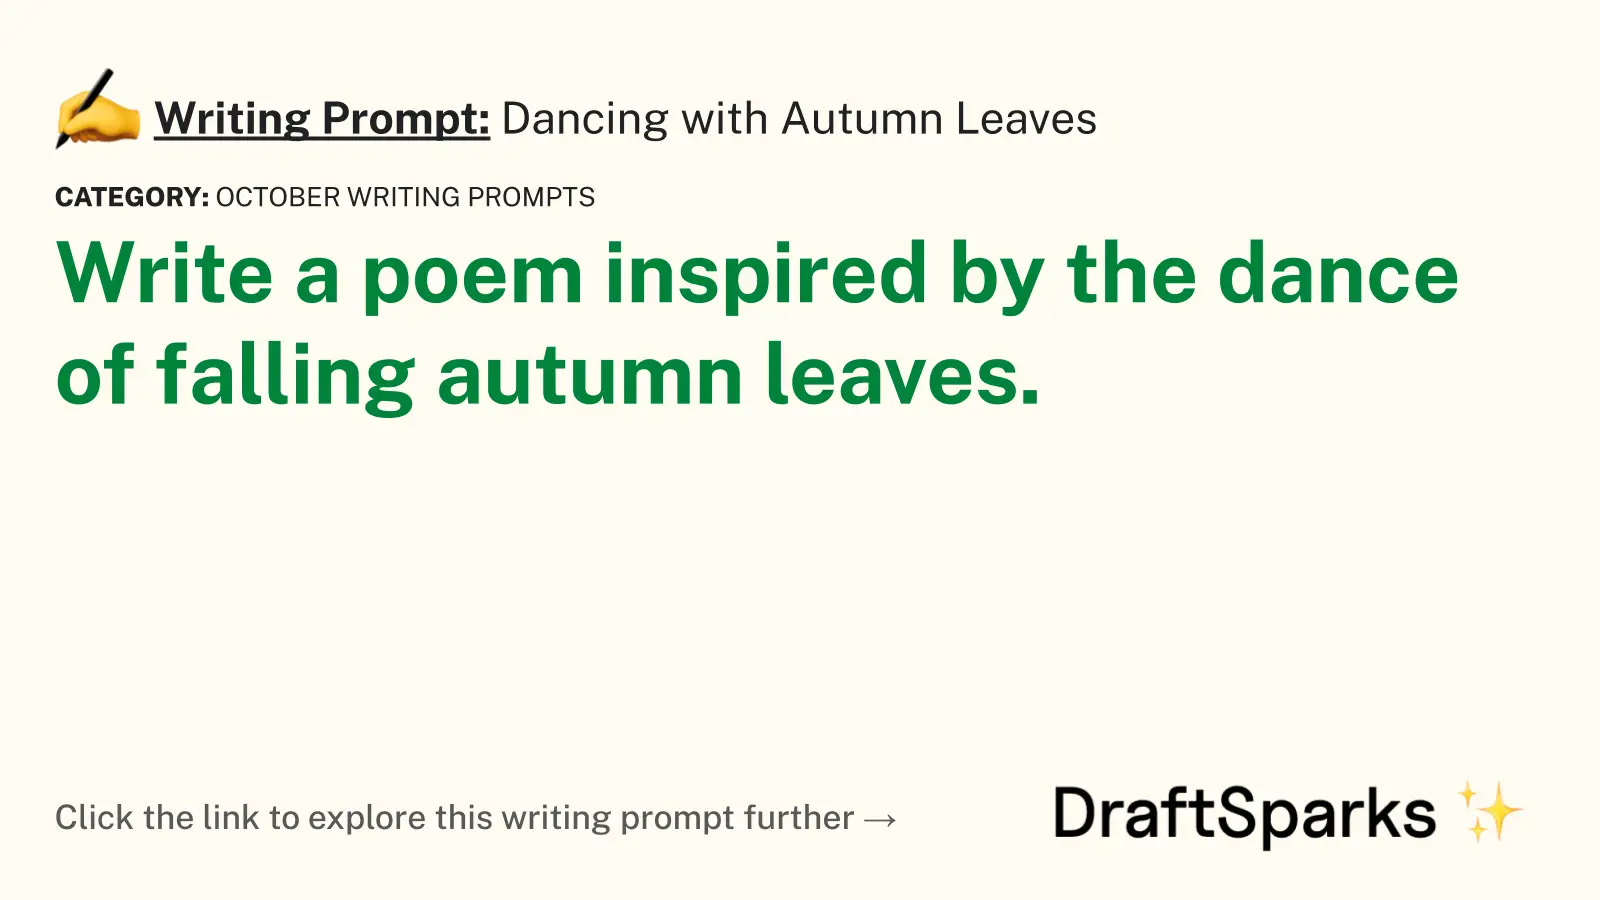 Dancing with Autumn Leaves